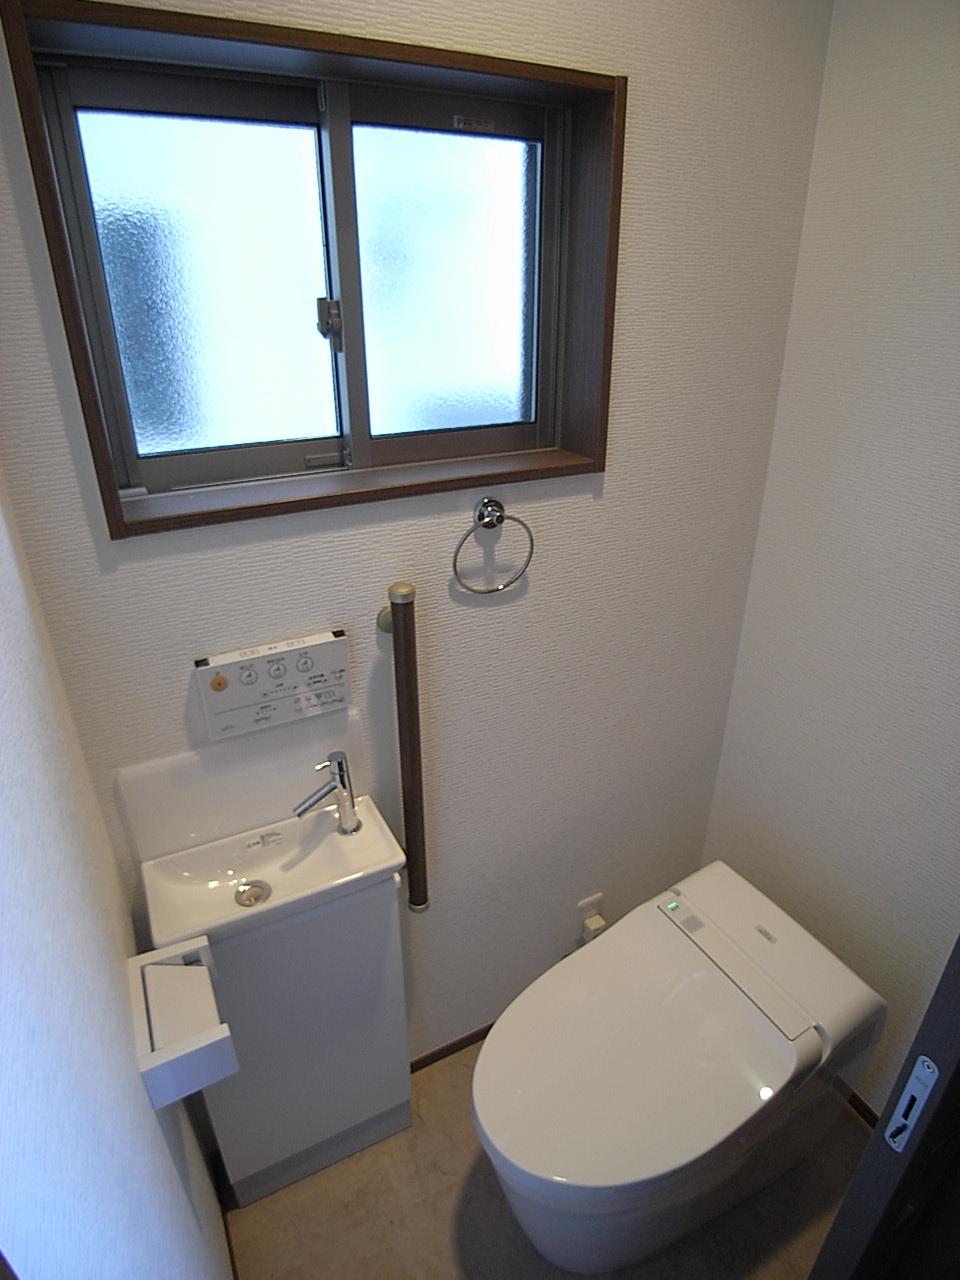 Toilet. Second floor toilet is tankless ・ It is fashionable and hand washing